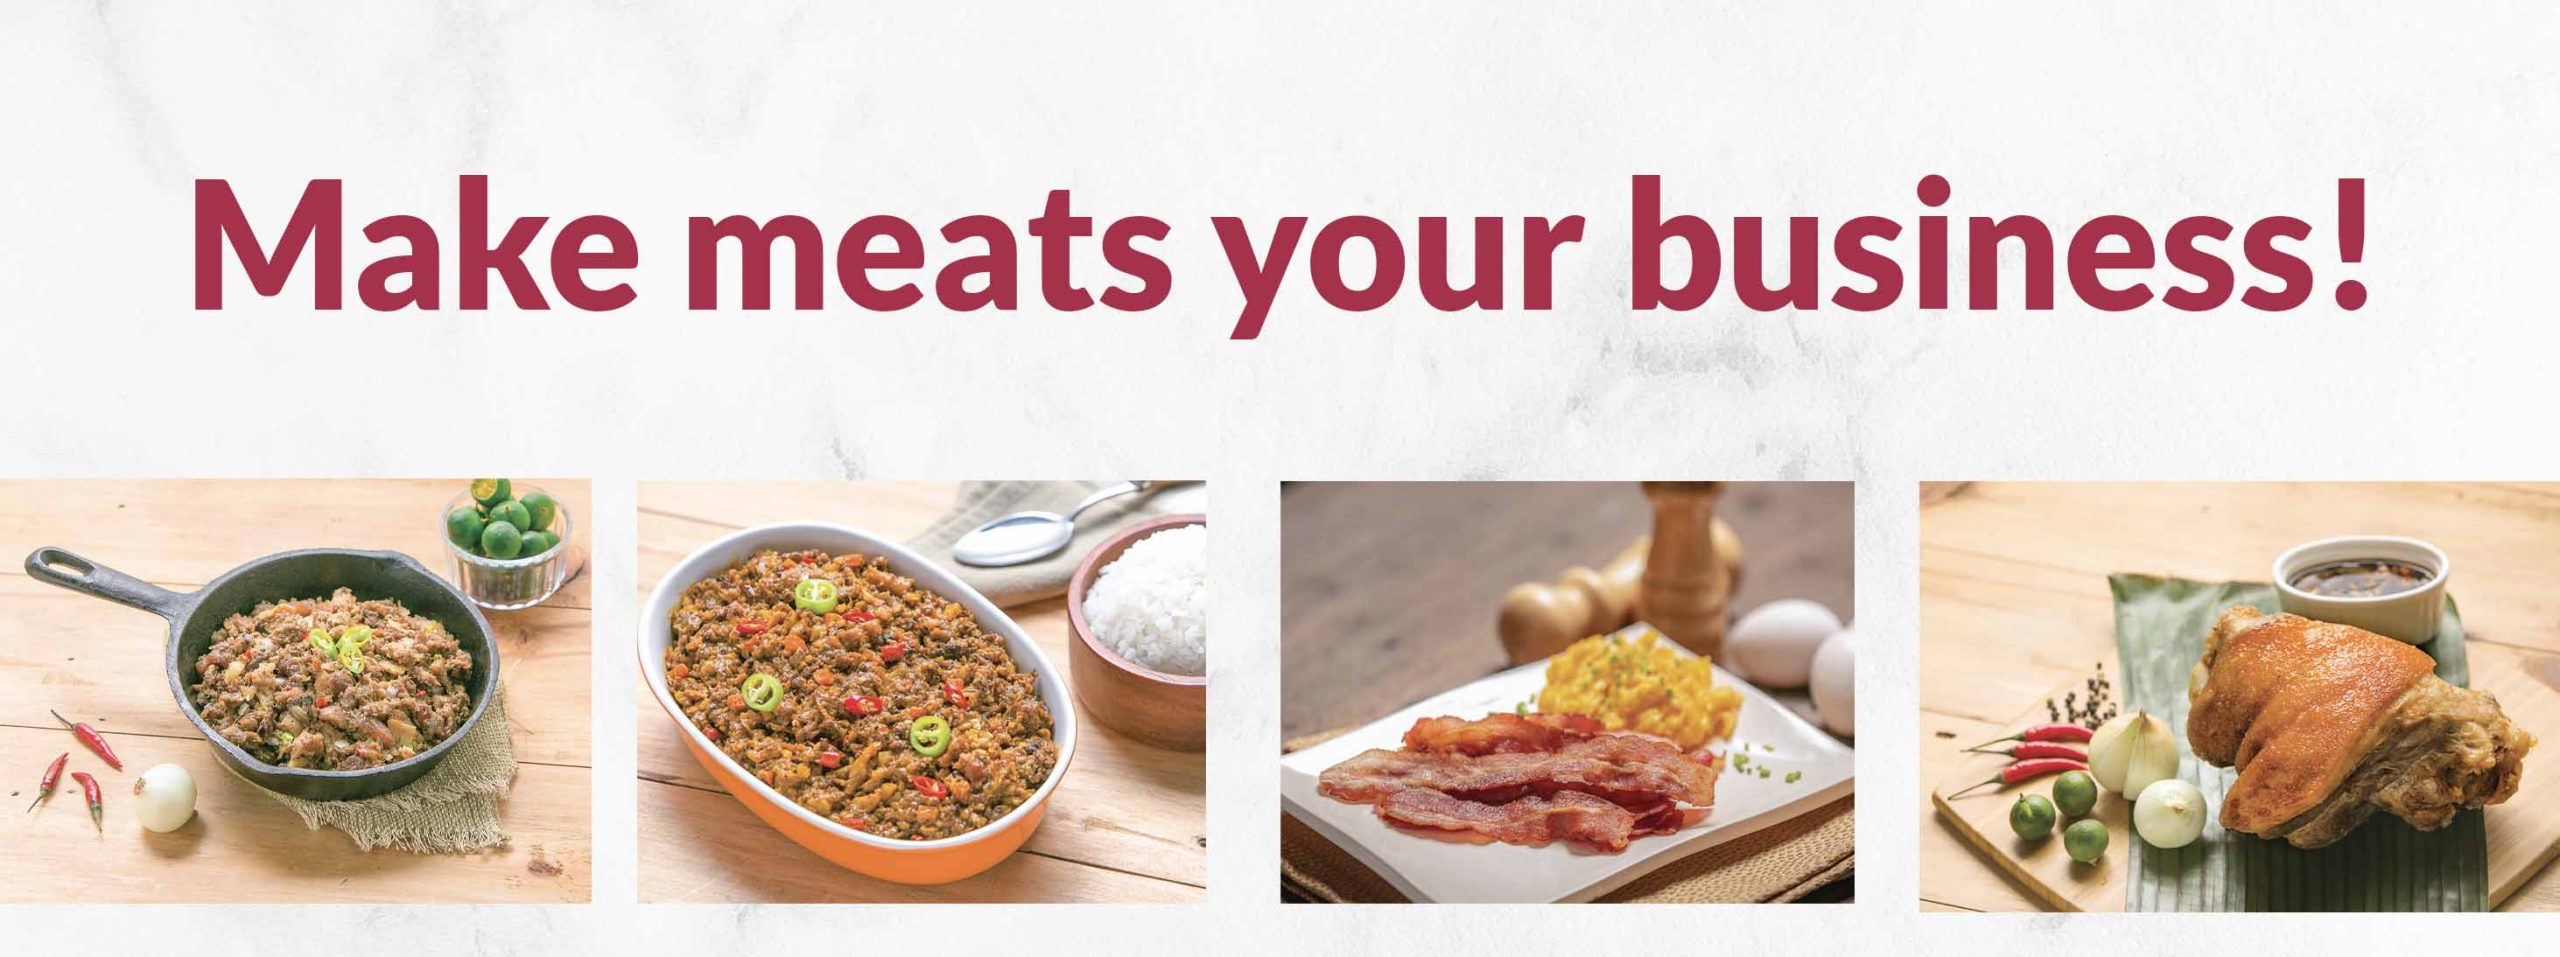 Make Meats Your Business